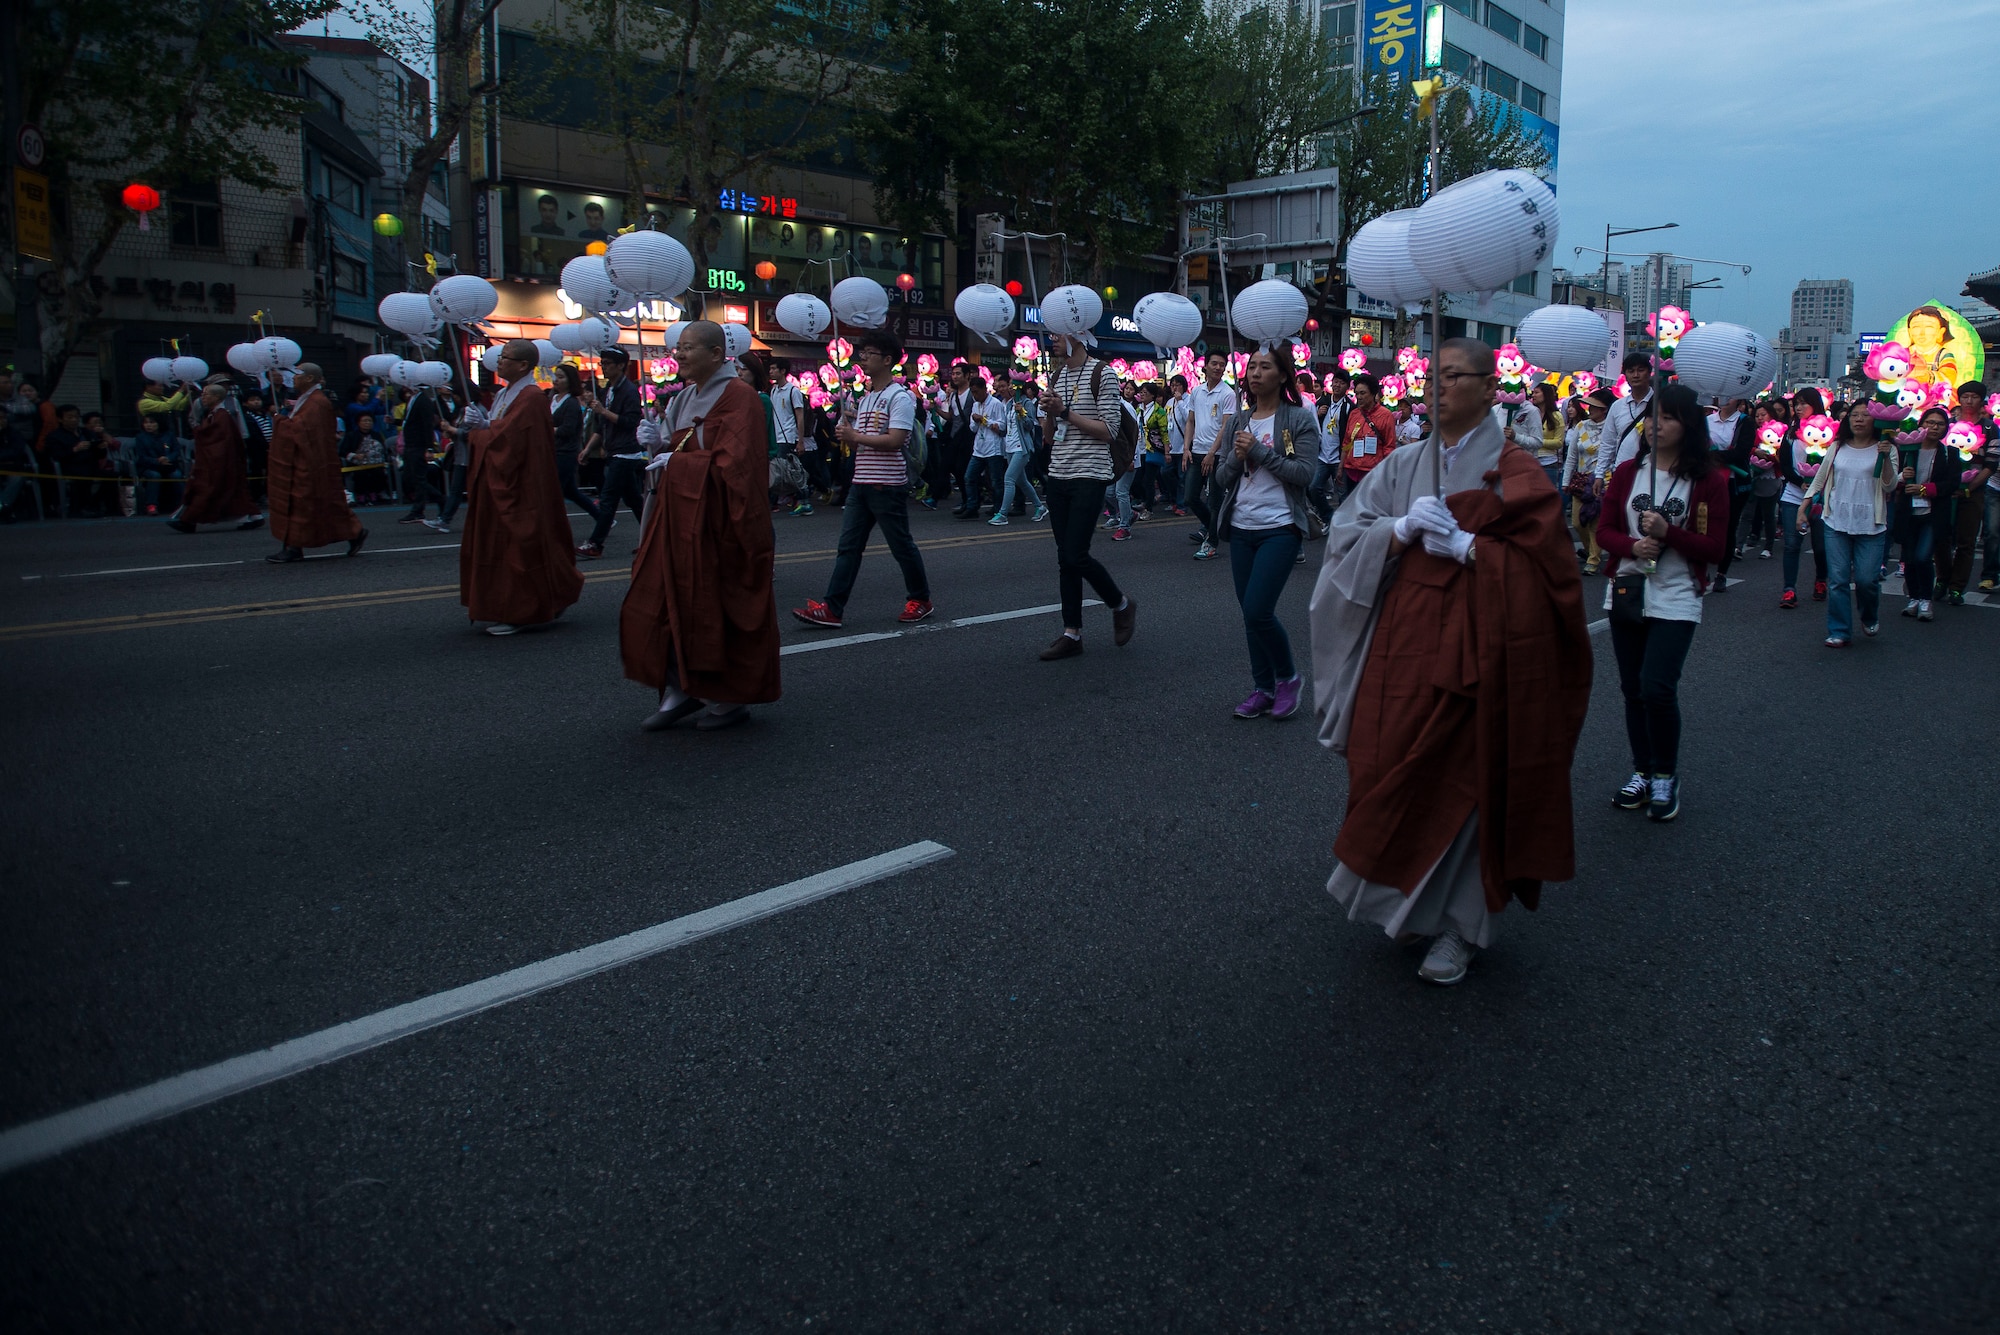 Buddhist monks march in the Lotus Lantern Festival April 26, 2014, in Seoul, Republic of Korea. The Buddhists marched to give blessings for the deceased or missing persons of the passenger ship Sewol that sank off the coast of Gwanmaedo Island April 15. (U.S. Air Force photo by Staff Sgt. Jake Barreiro)